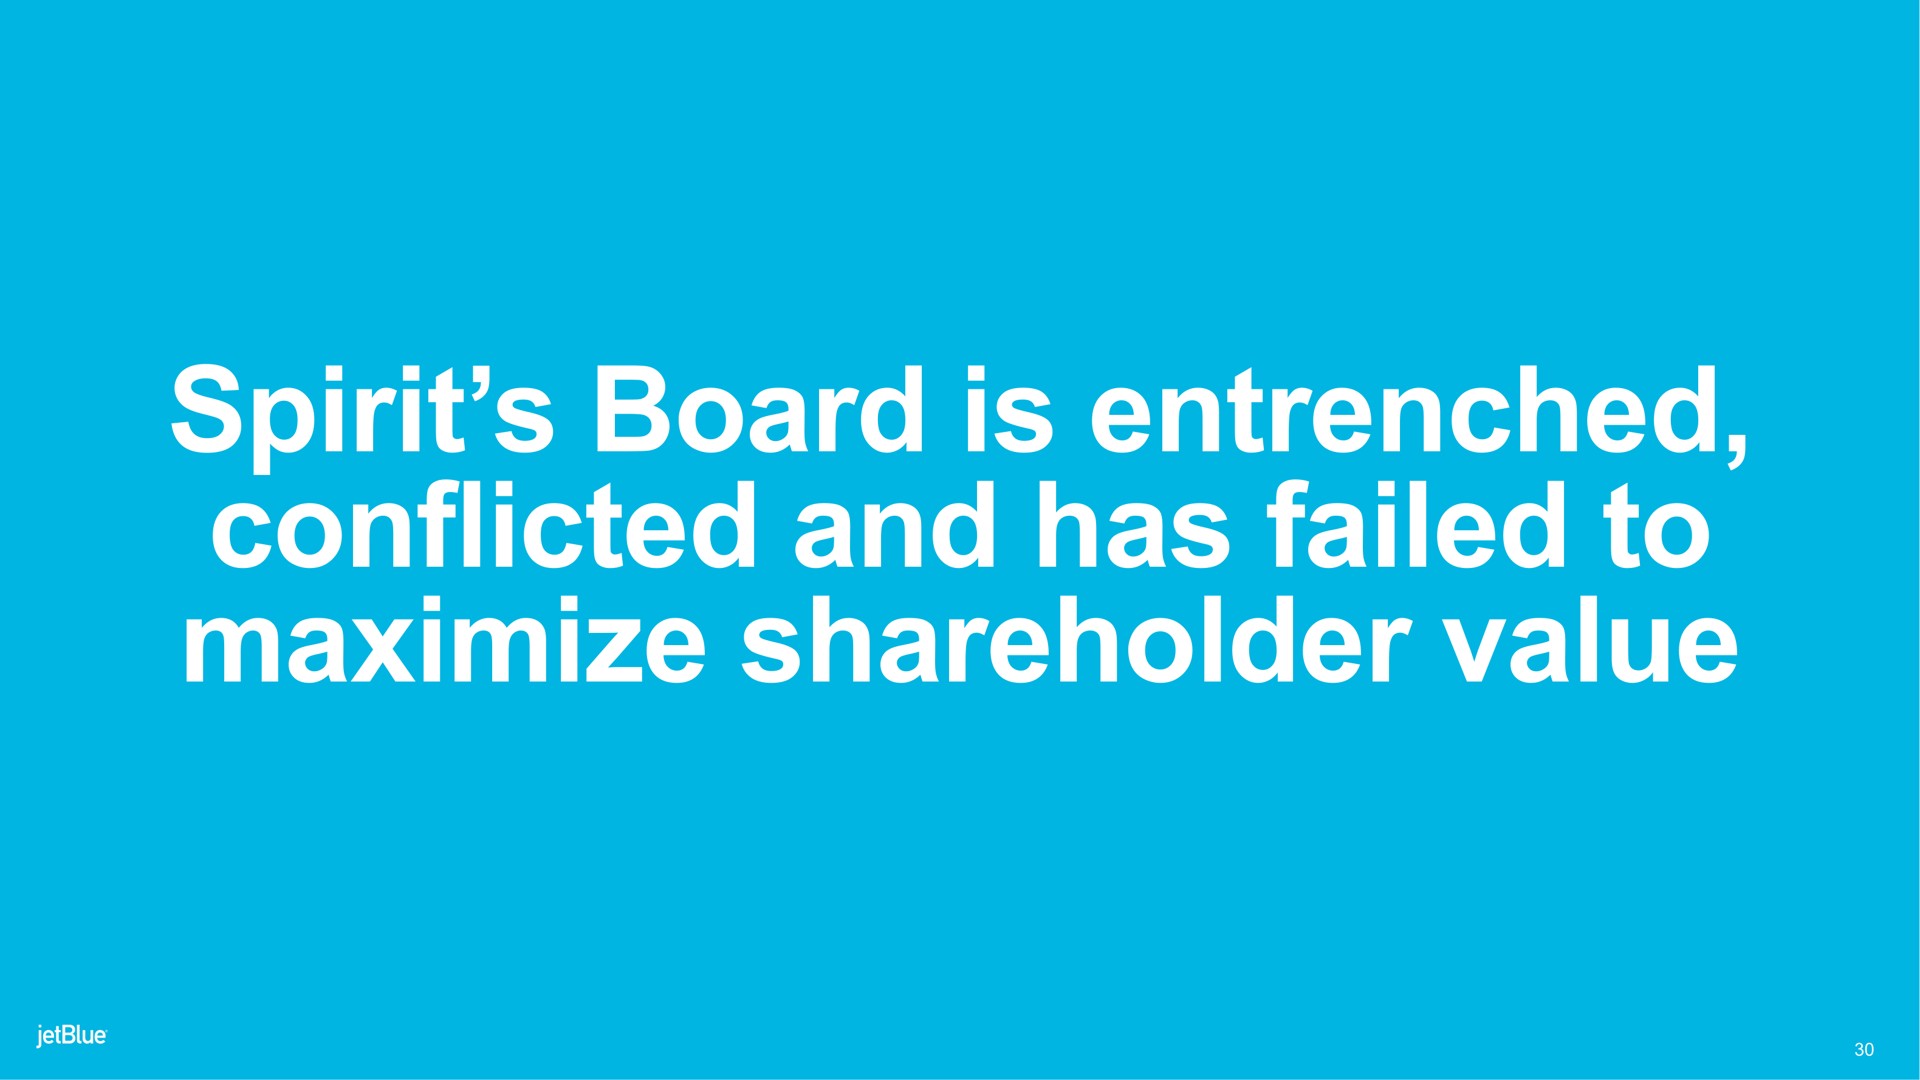 spirit board is entrenched conflicted and has failed to maximize shareholder value | jetBlue